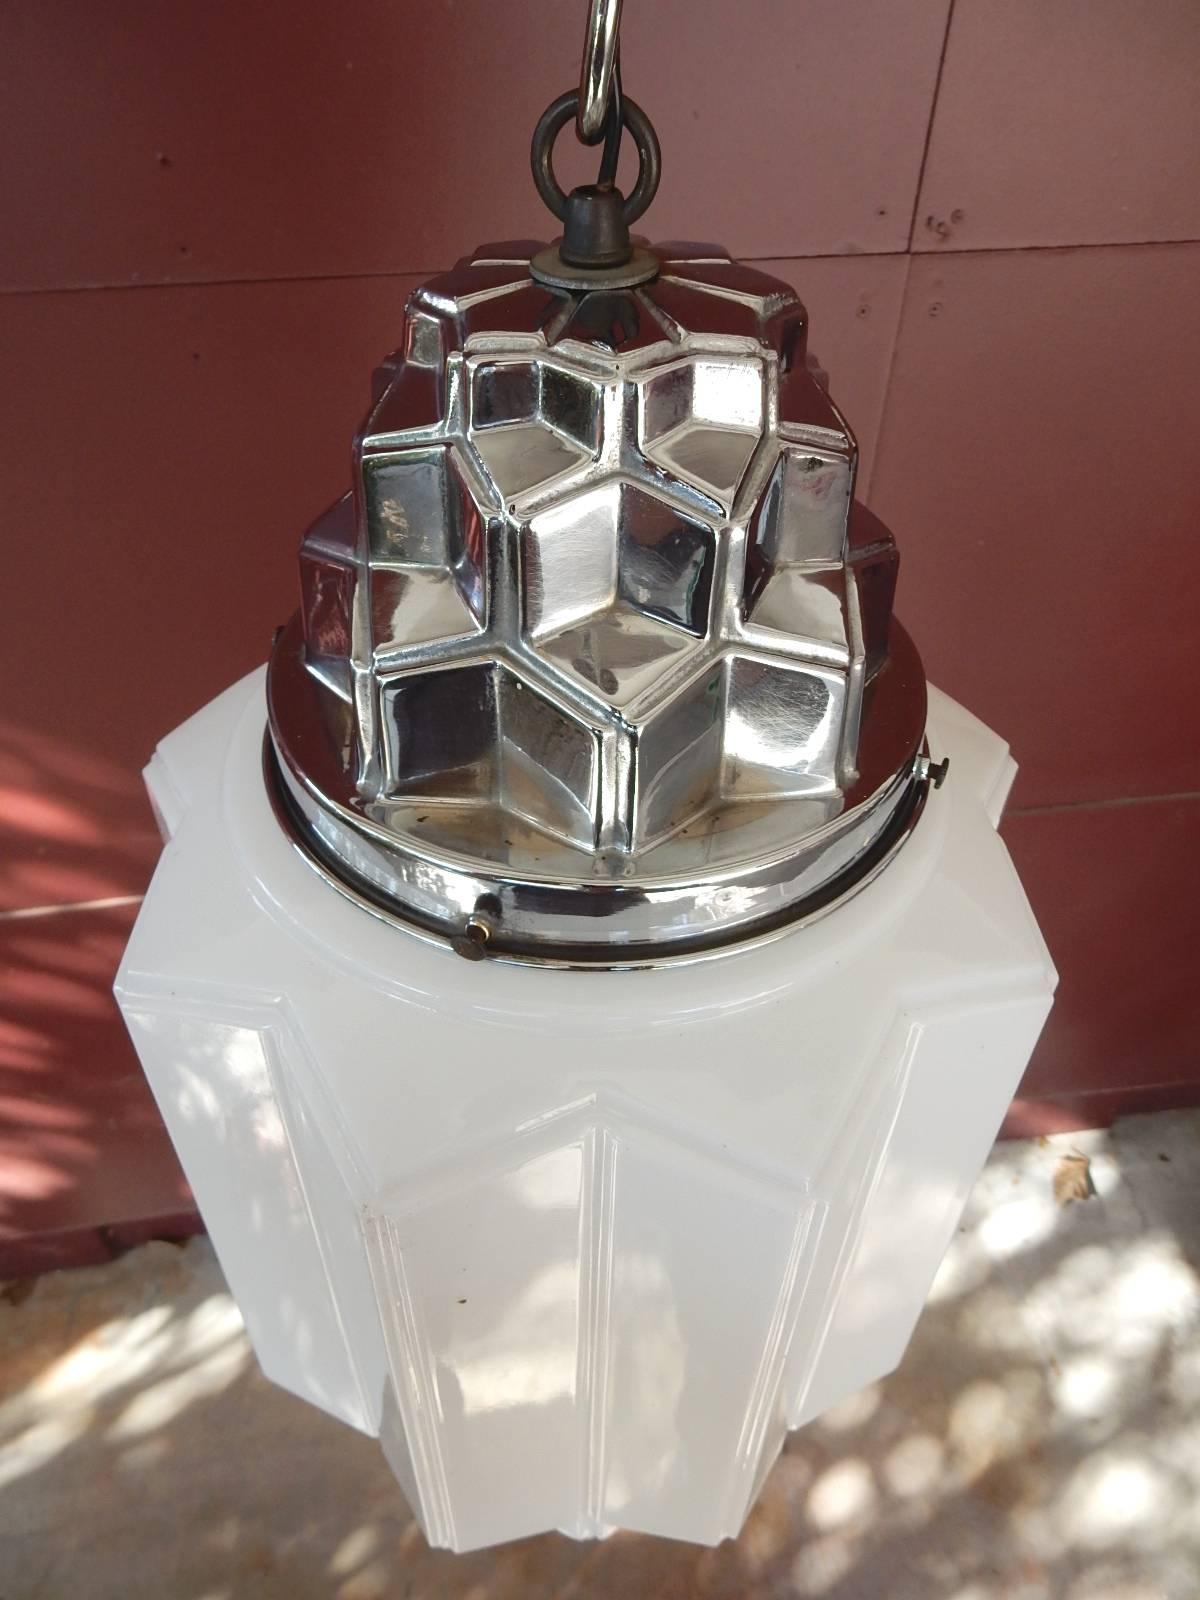 1930's commercial theatre pendant made of thin hand formed milk glass with nickel-plated cap that identically mimics the cubist design of globe. Takes a single standard light bulb. New chrome chain, wiring and ceiling cap giving it a 39